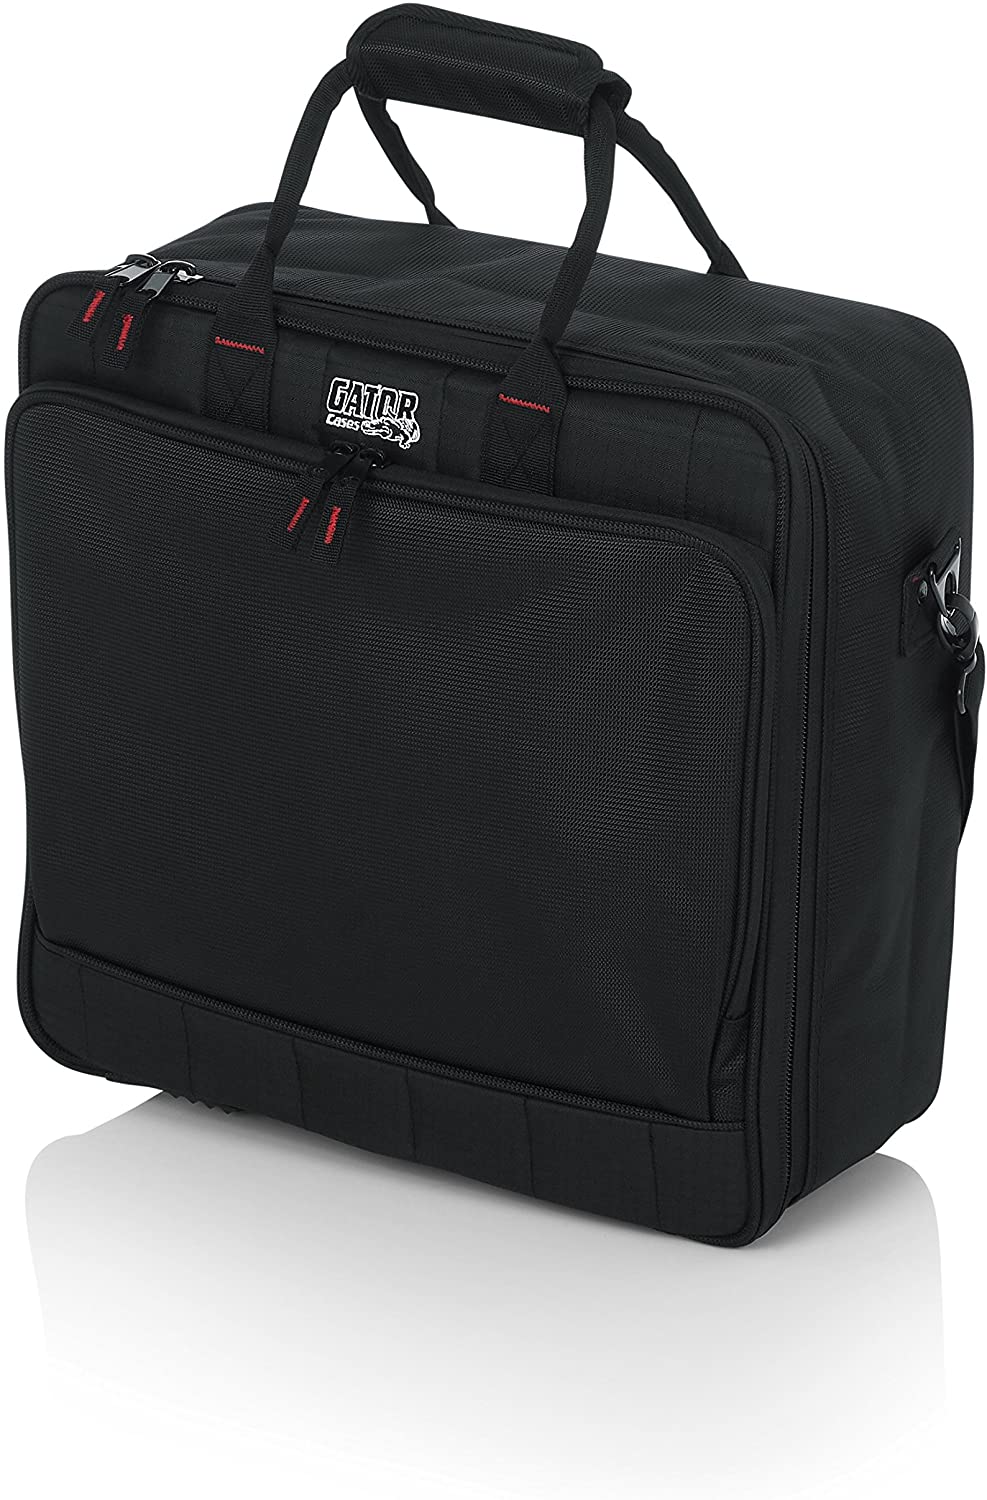 Gator Padded Mixer Case Equipment Gear Bag with Cord Management G-MIXERBAG-1515 - Pro-Distributing